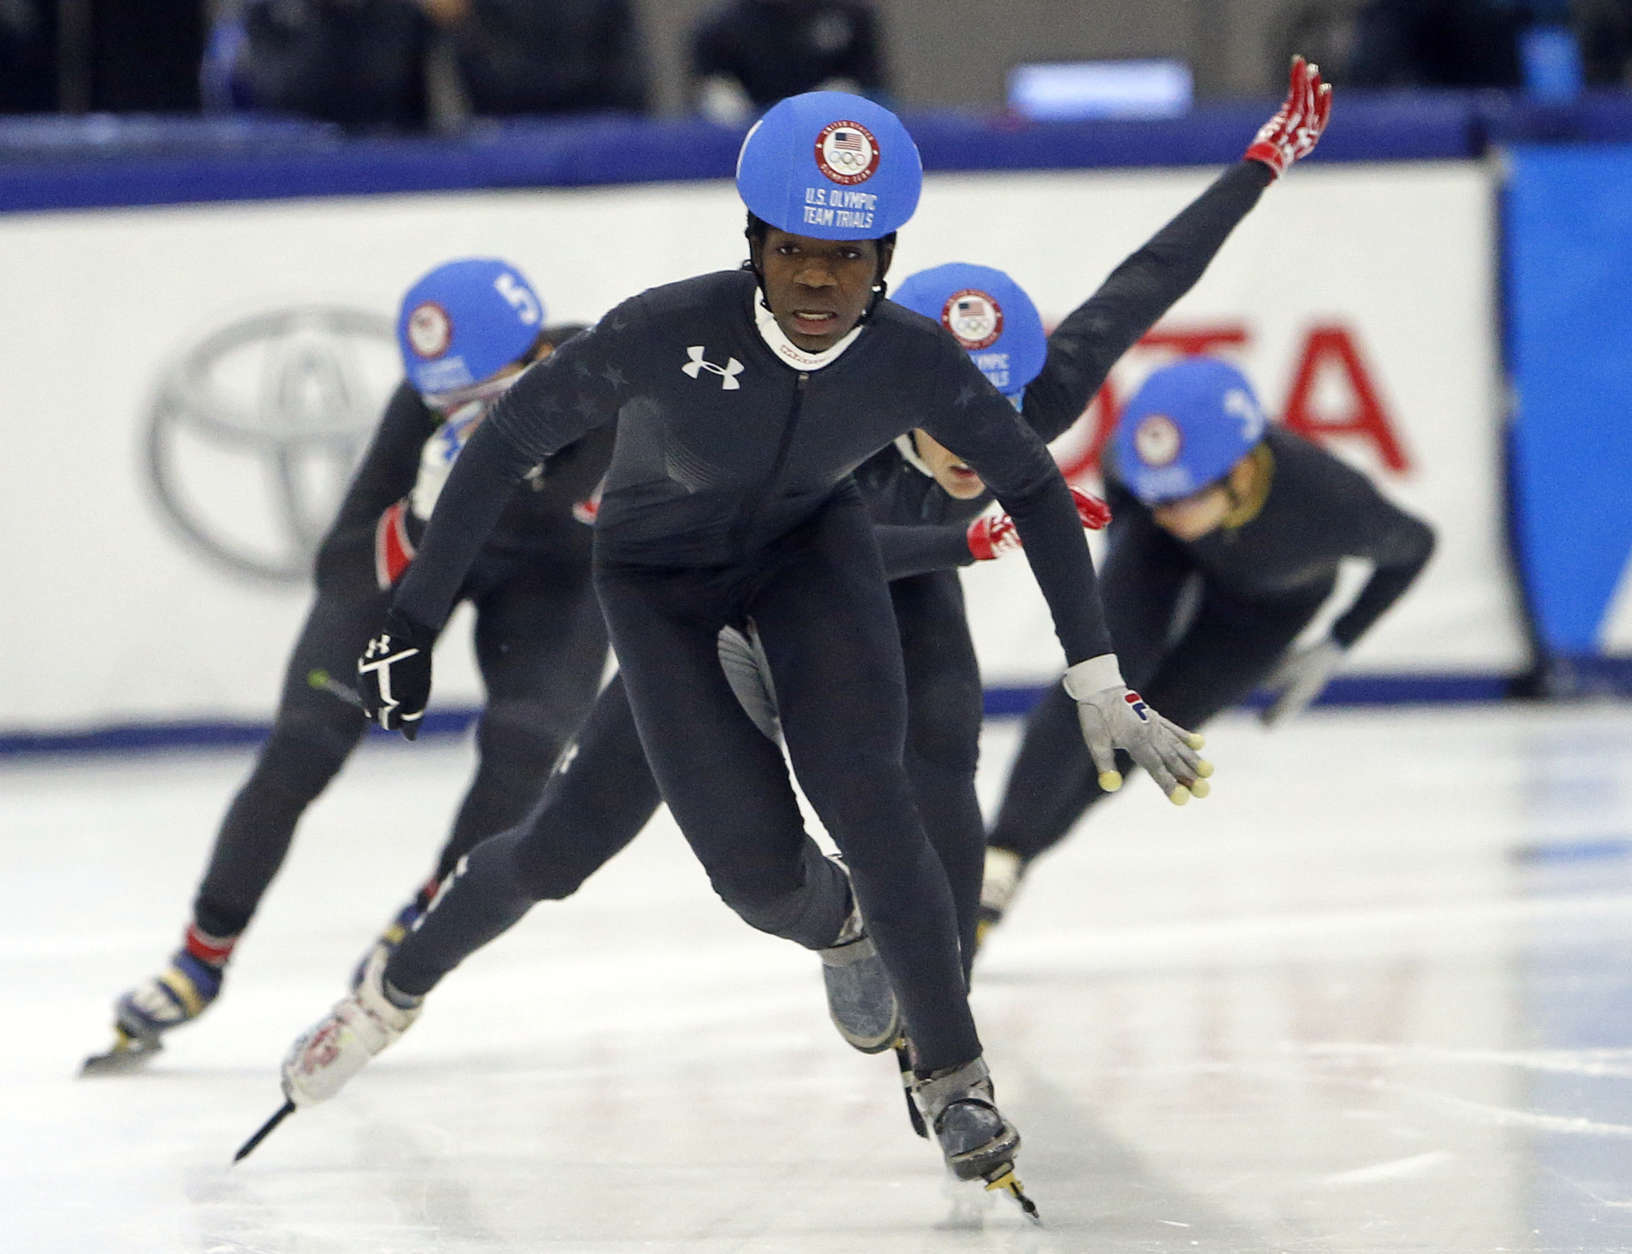 Maame Biney, center, races to finish during the women's 500-meter final A during the U.S. Olympic short track speedskating trials Saturday, Dec. 16, 2017, in Kearns, Utah. (AP Photo/Rick Bowmer)